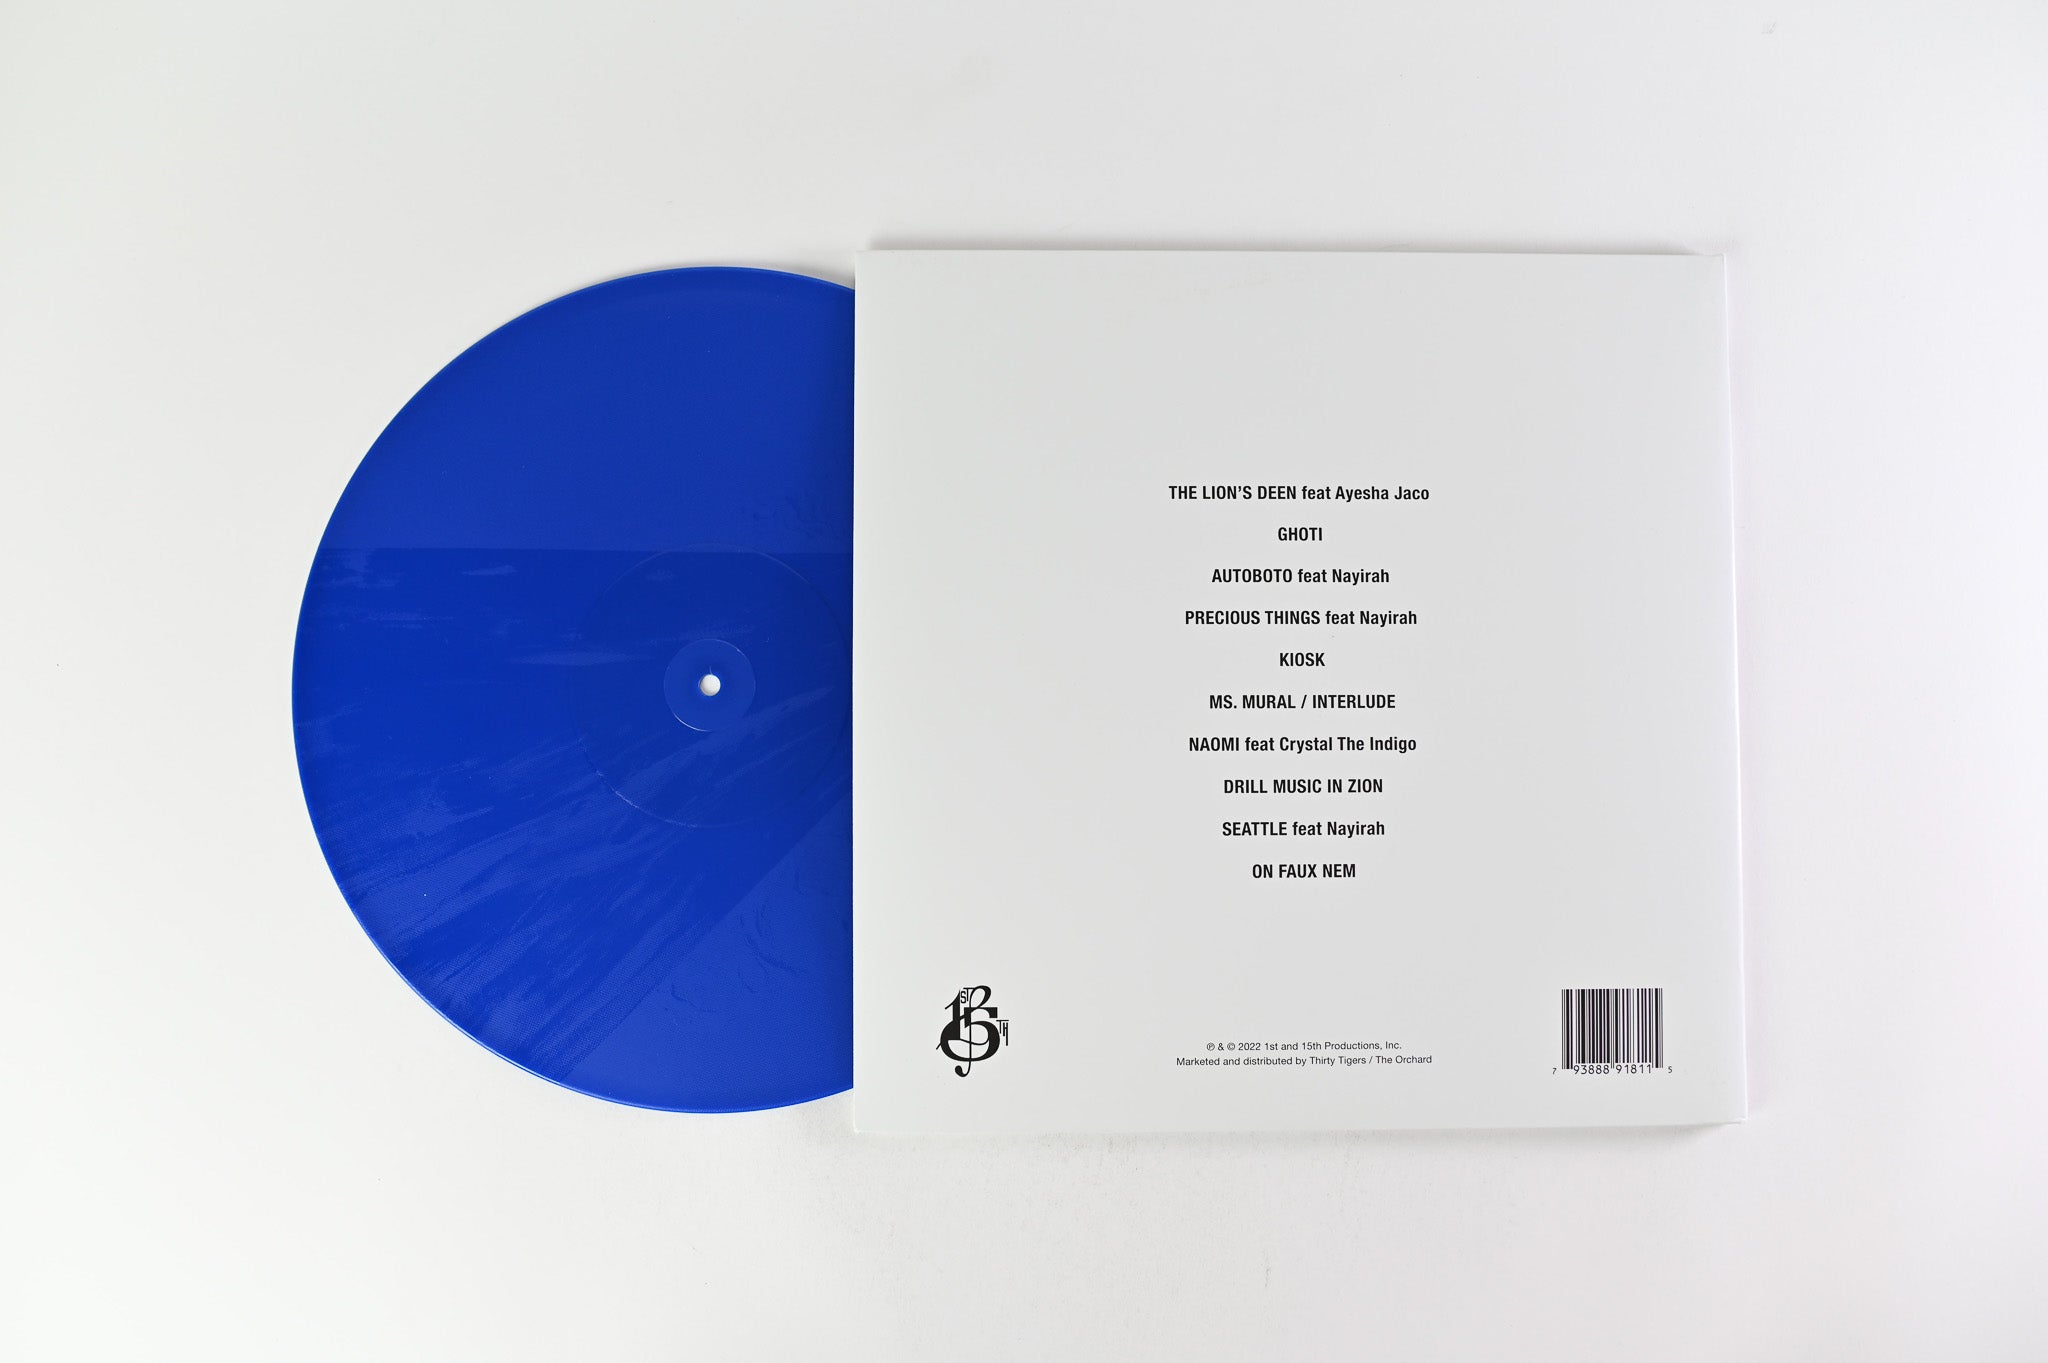 Lupe Fiasco - Drill Music in Zion on 1st & 15th - Blue Vinyl